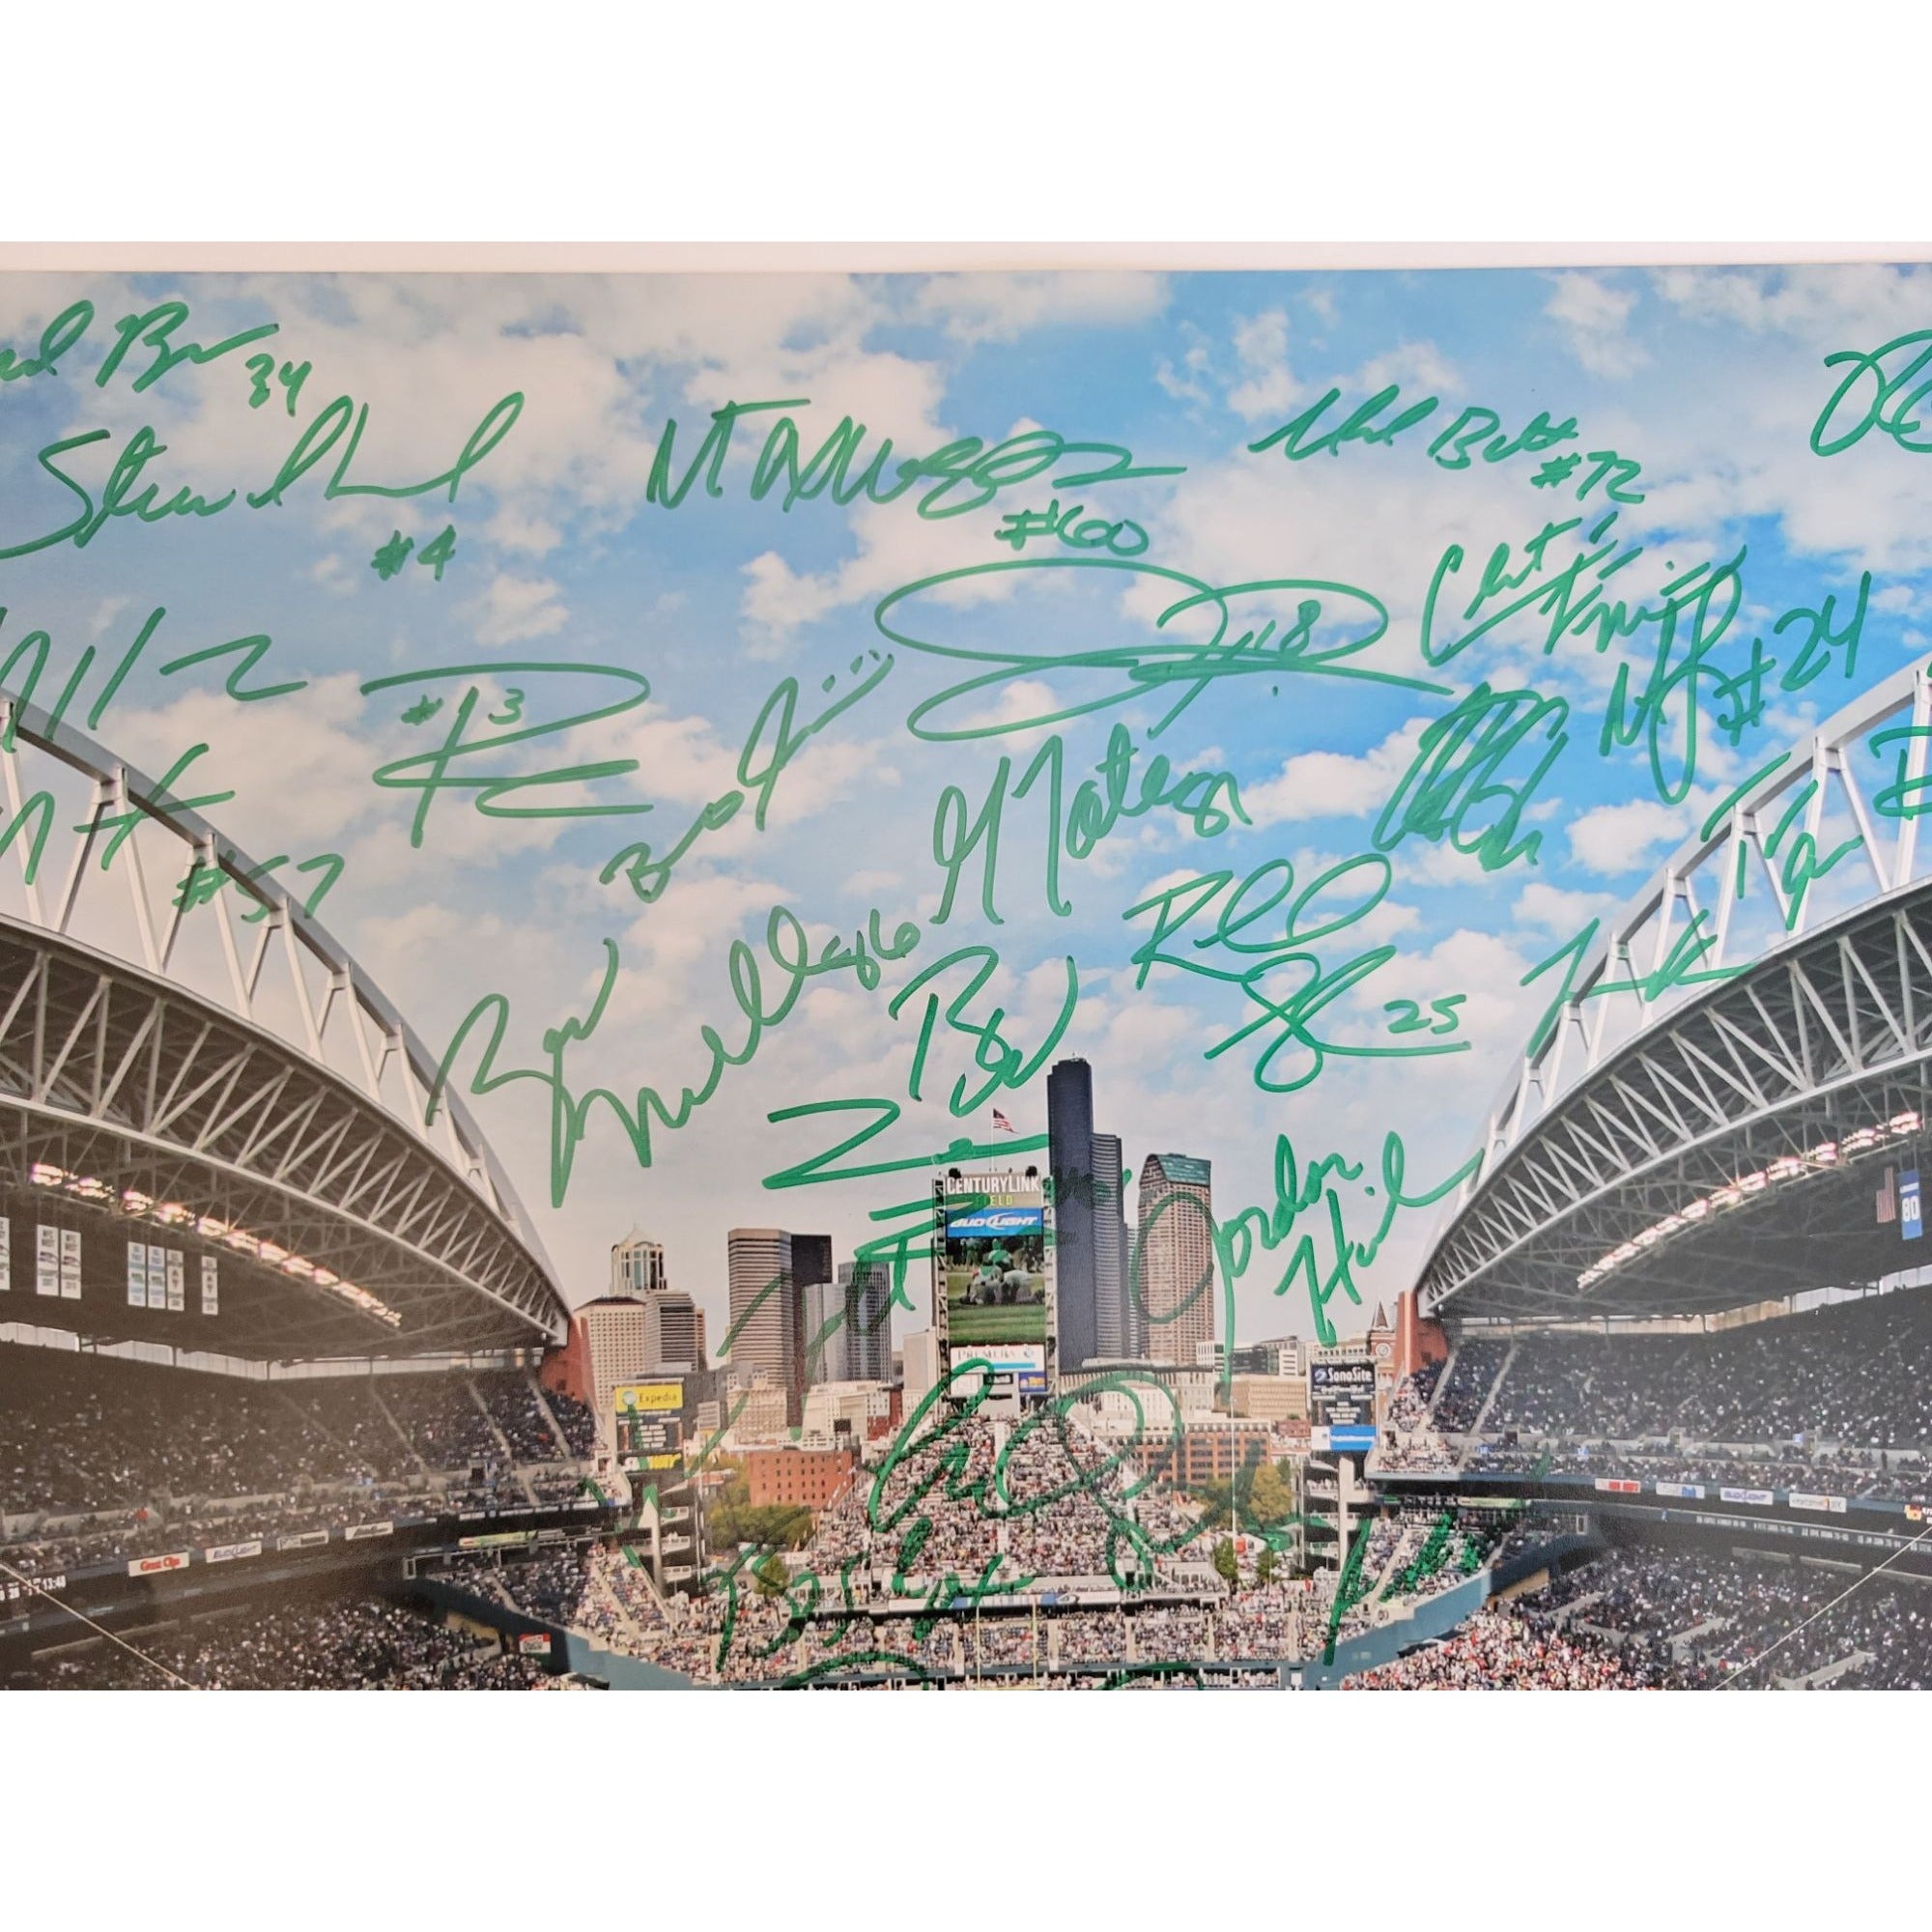 Seattle Seahawks Russell Wilson Marshawn Lynch Pete Carroll team signed 16 x 20 photo 2014 Super Bowl champs